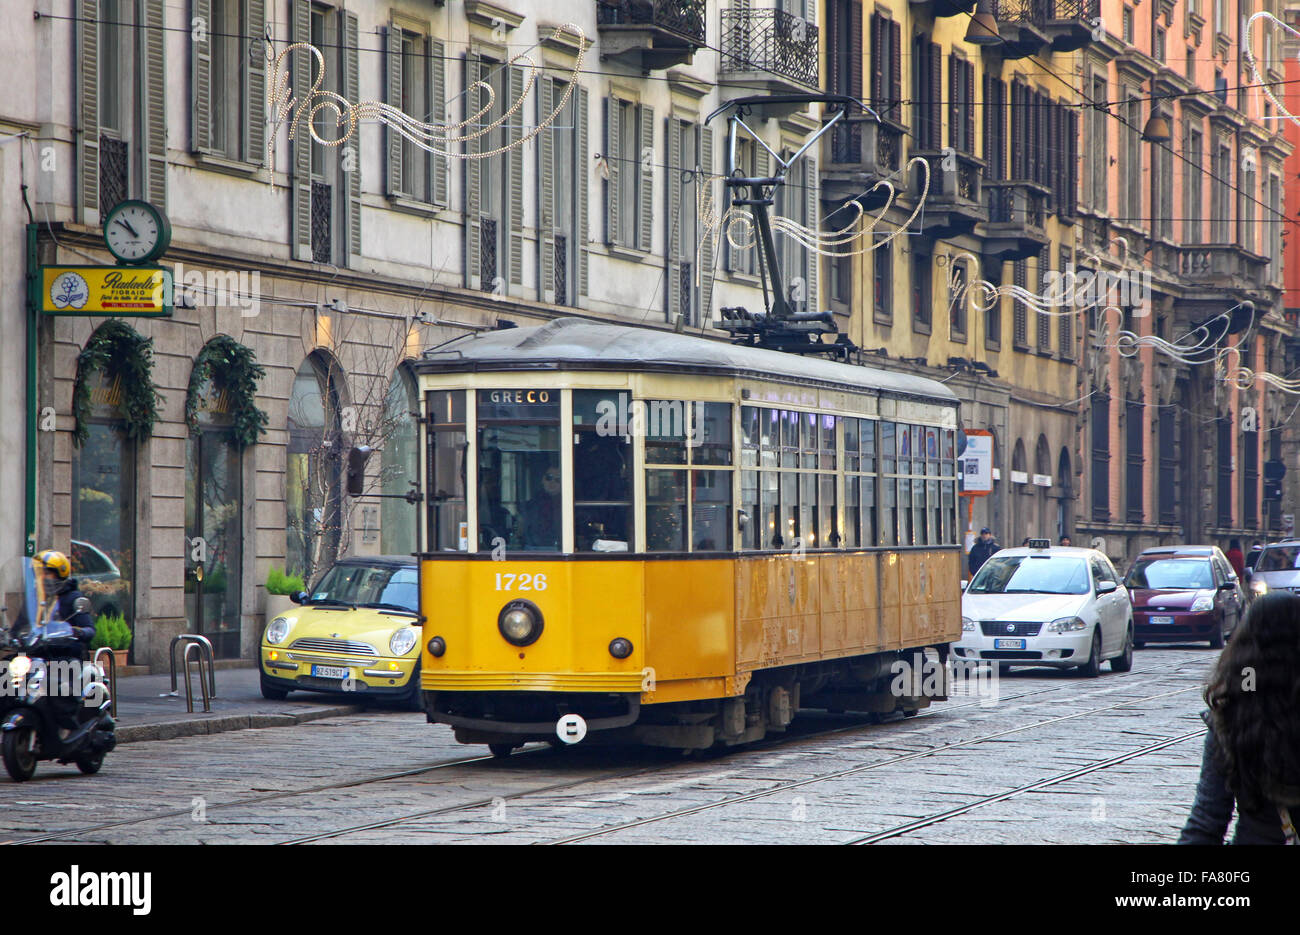 MILAN, ITALY - DECEMBER 31, 2010: Old traditional tram (ATM Class 1500) on the street of Milan. Milan tramway network operation Stock Photo